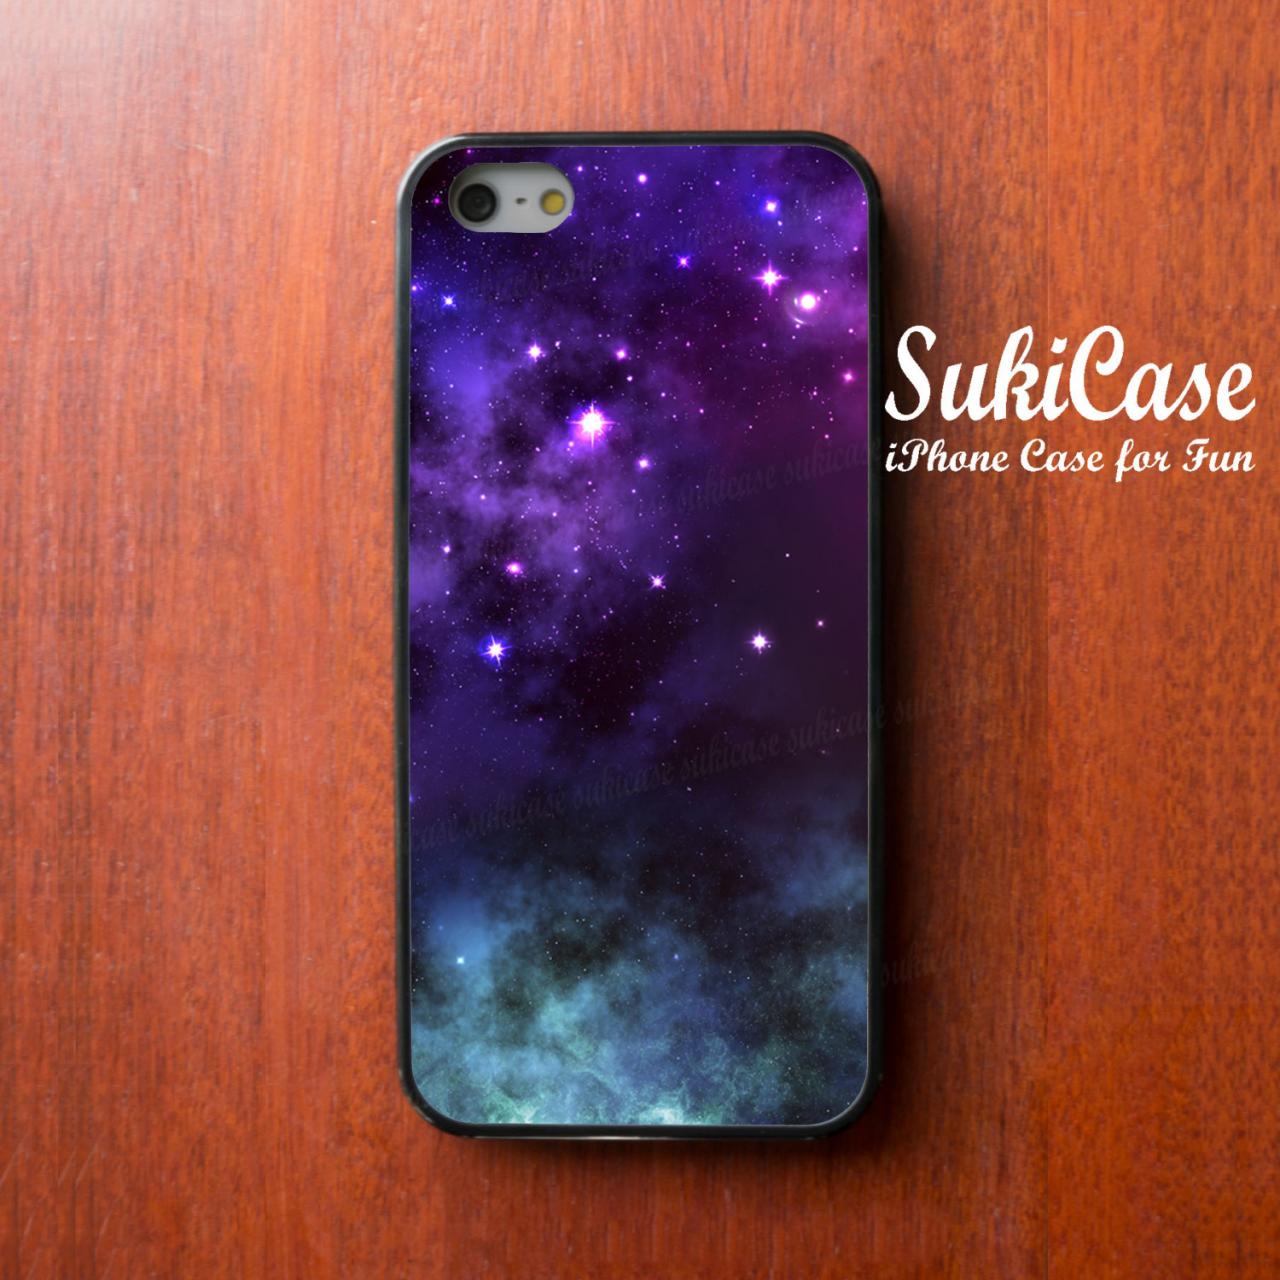 Galaxy Iphone 5s Case Cosmos Space Star Nebula Iphone Case Iphone 5 Case Iphone 4 Case Samsung Galaxy S4 S3 Cover Iphone 5c Iphone 4s Cases